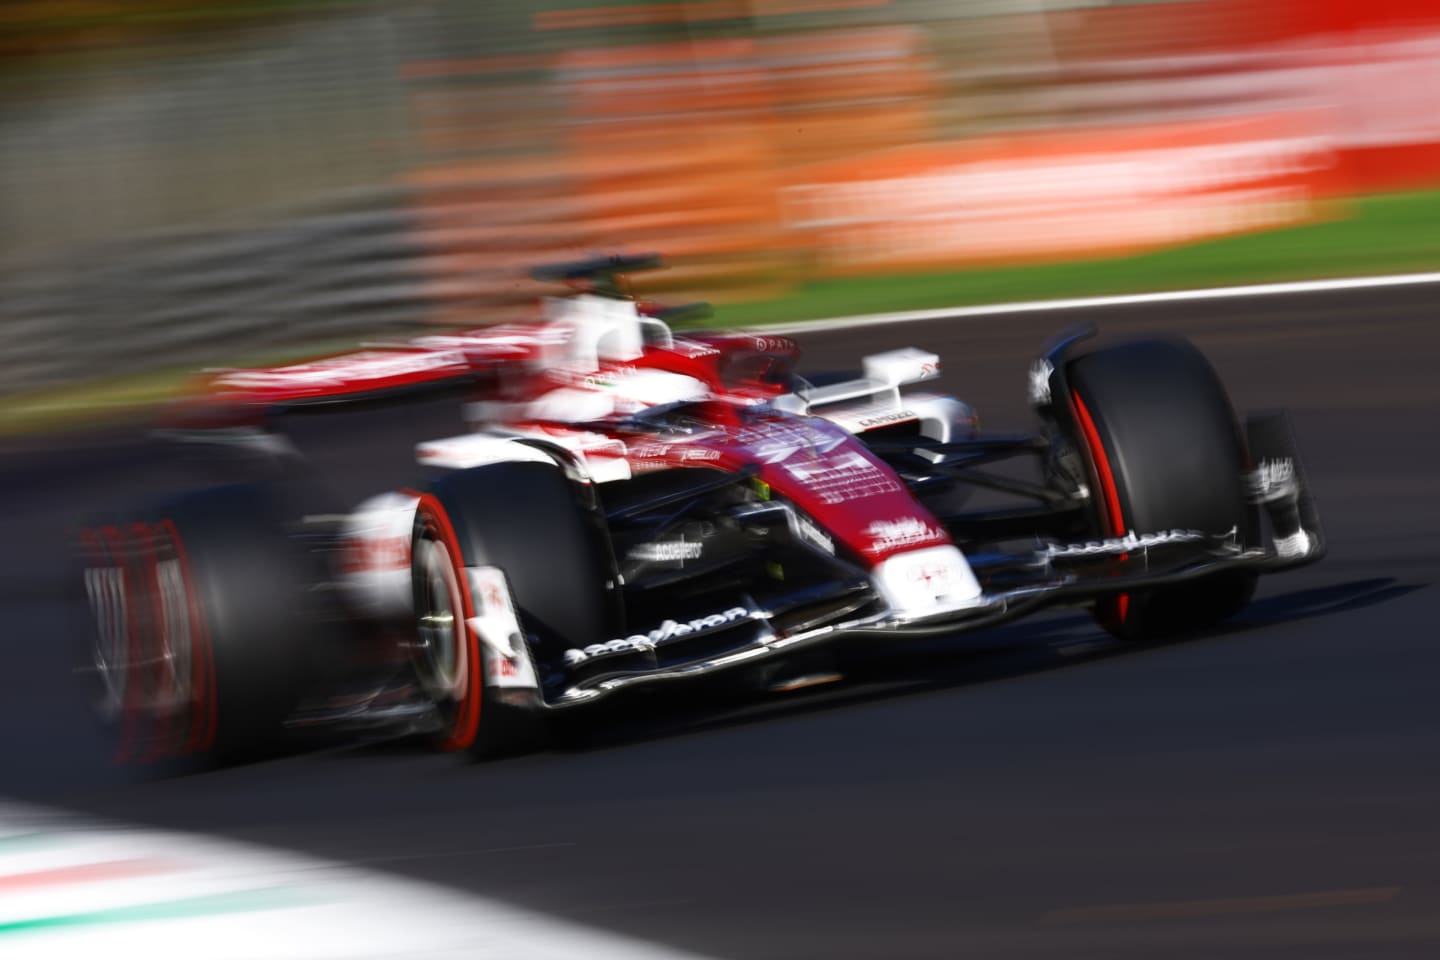 MONZA, ITALY - SEPTEMBER 09: Valtteri Bottas of Finland driving the (77) Alfa Romeo F1 C42 Ferrari on track during practice ahead of the F1 Grand Prix of Italy at Autodromo Nazionale Monza on September 09, 2022 in Monza, Italy. (Photo by Mark Thompson/Getty Images)